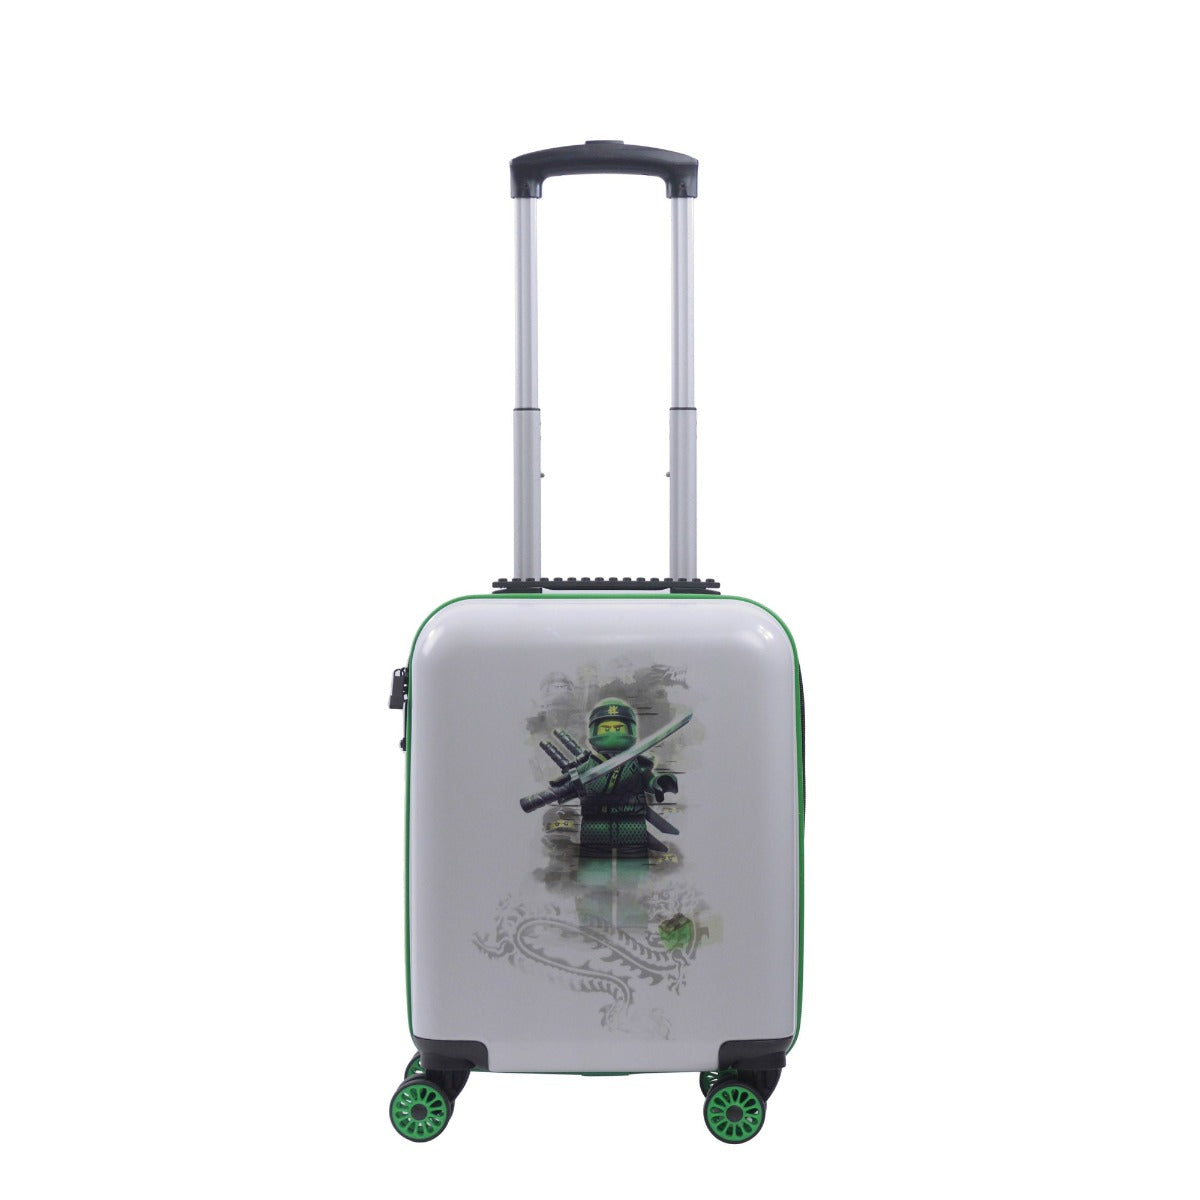 White Lego Play Date Ninjago 18-inch kids carry-on rolling luggage